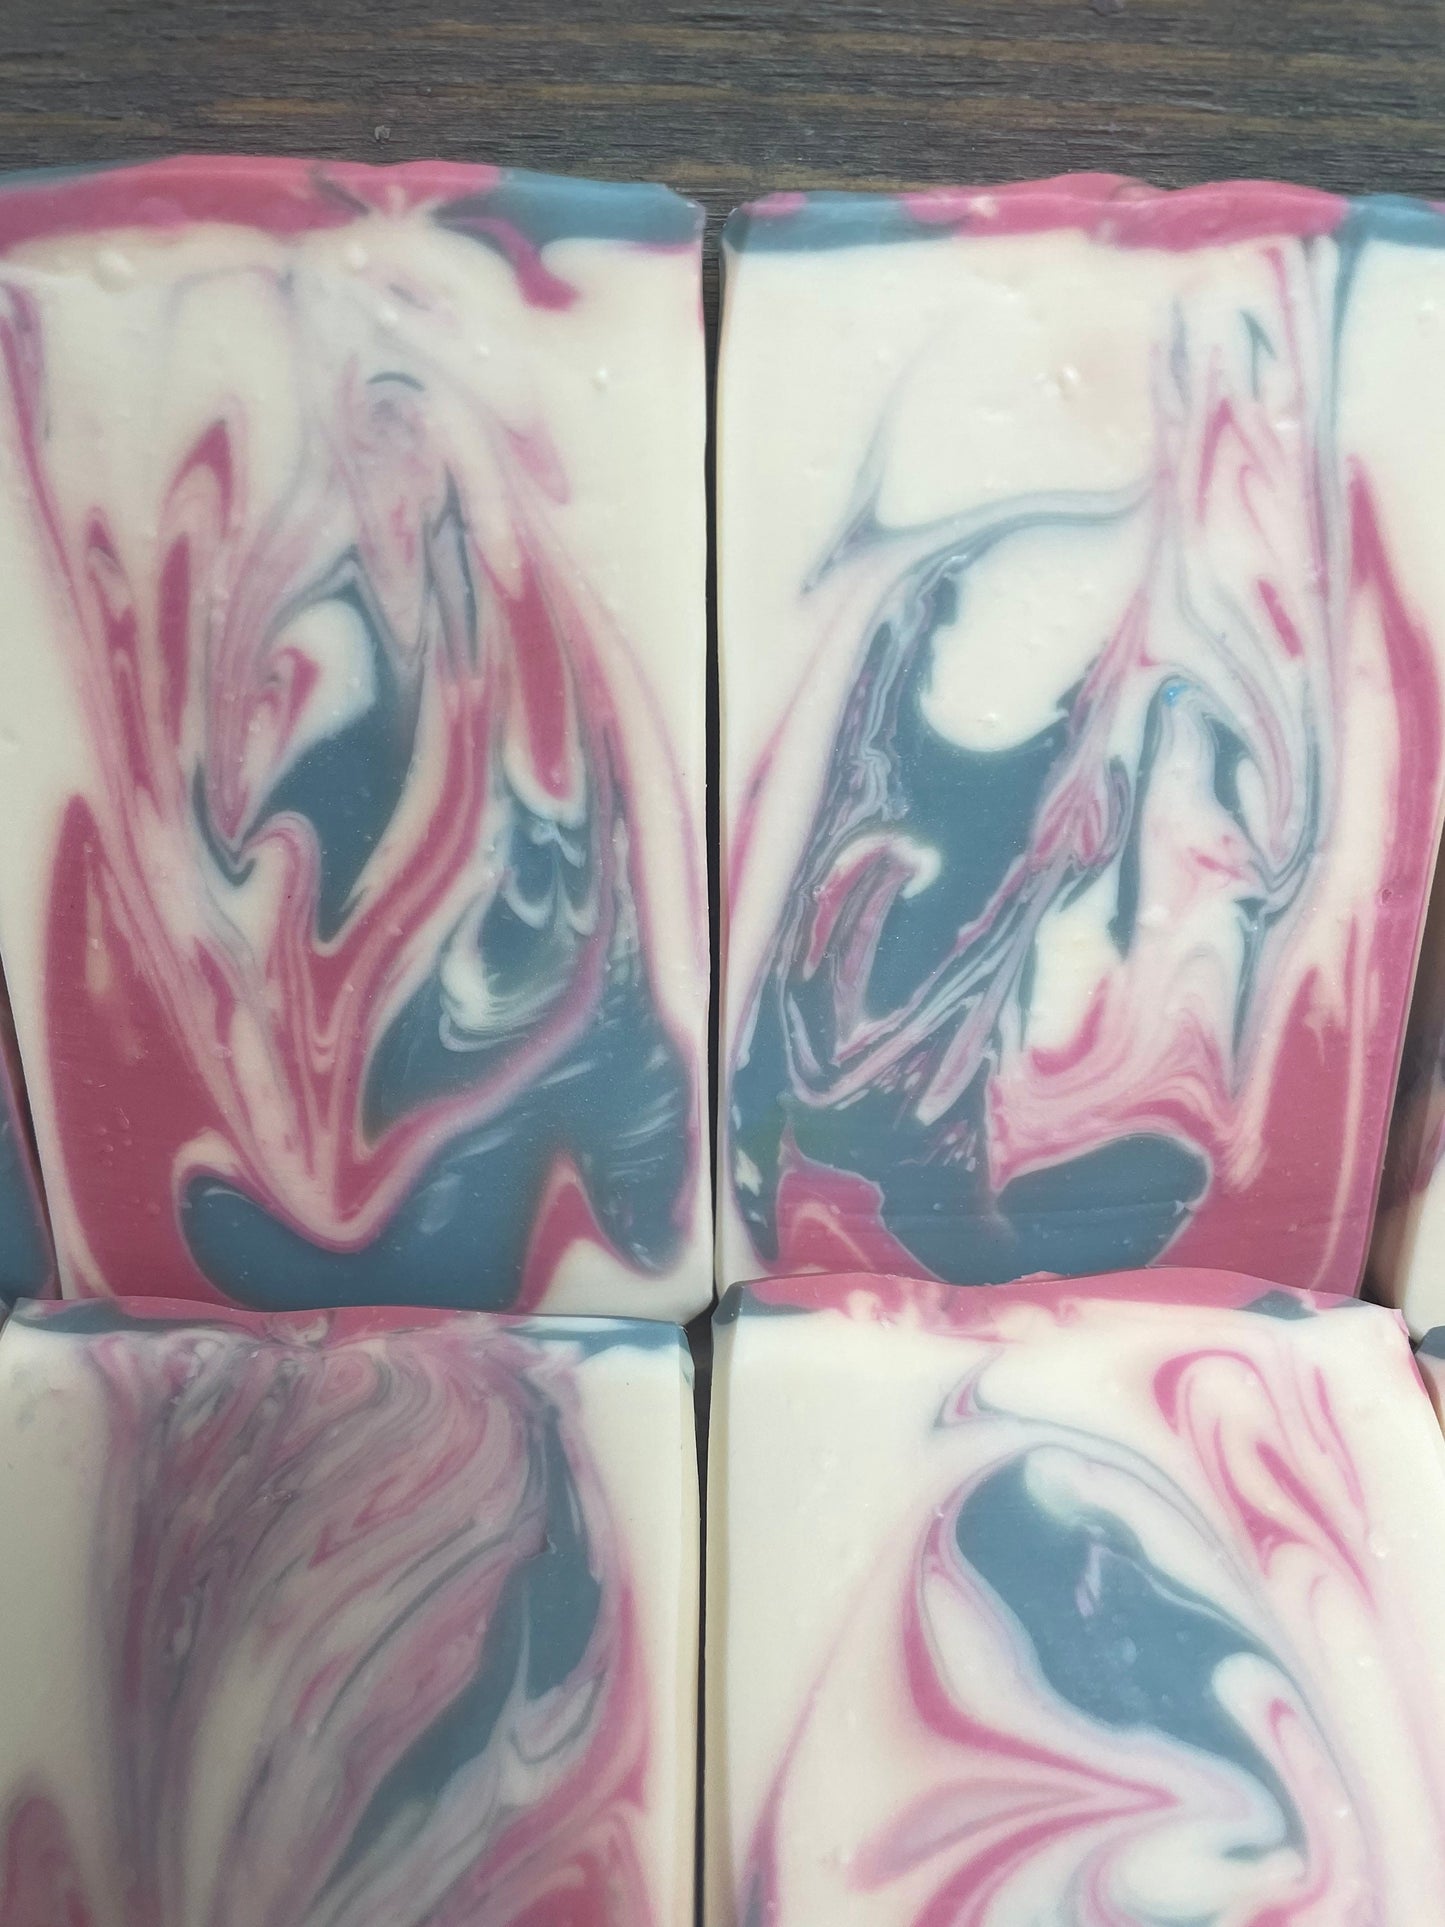 a photo of Angel soap with red, black and white swirls